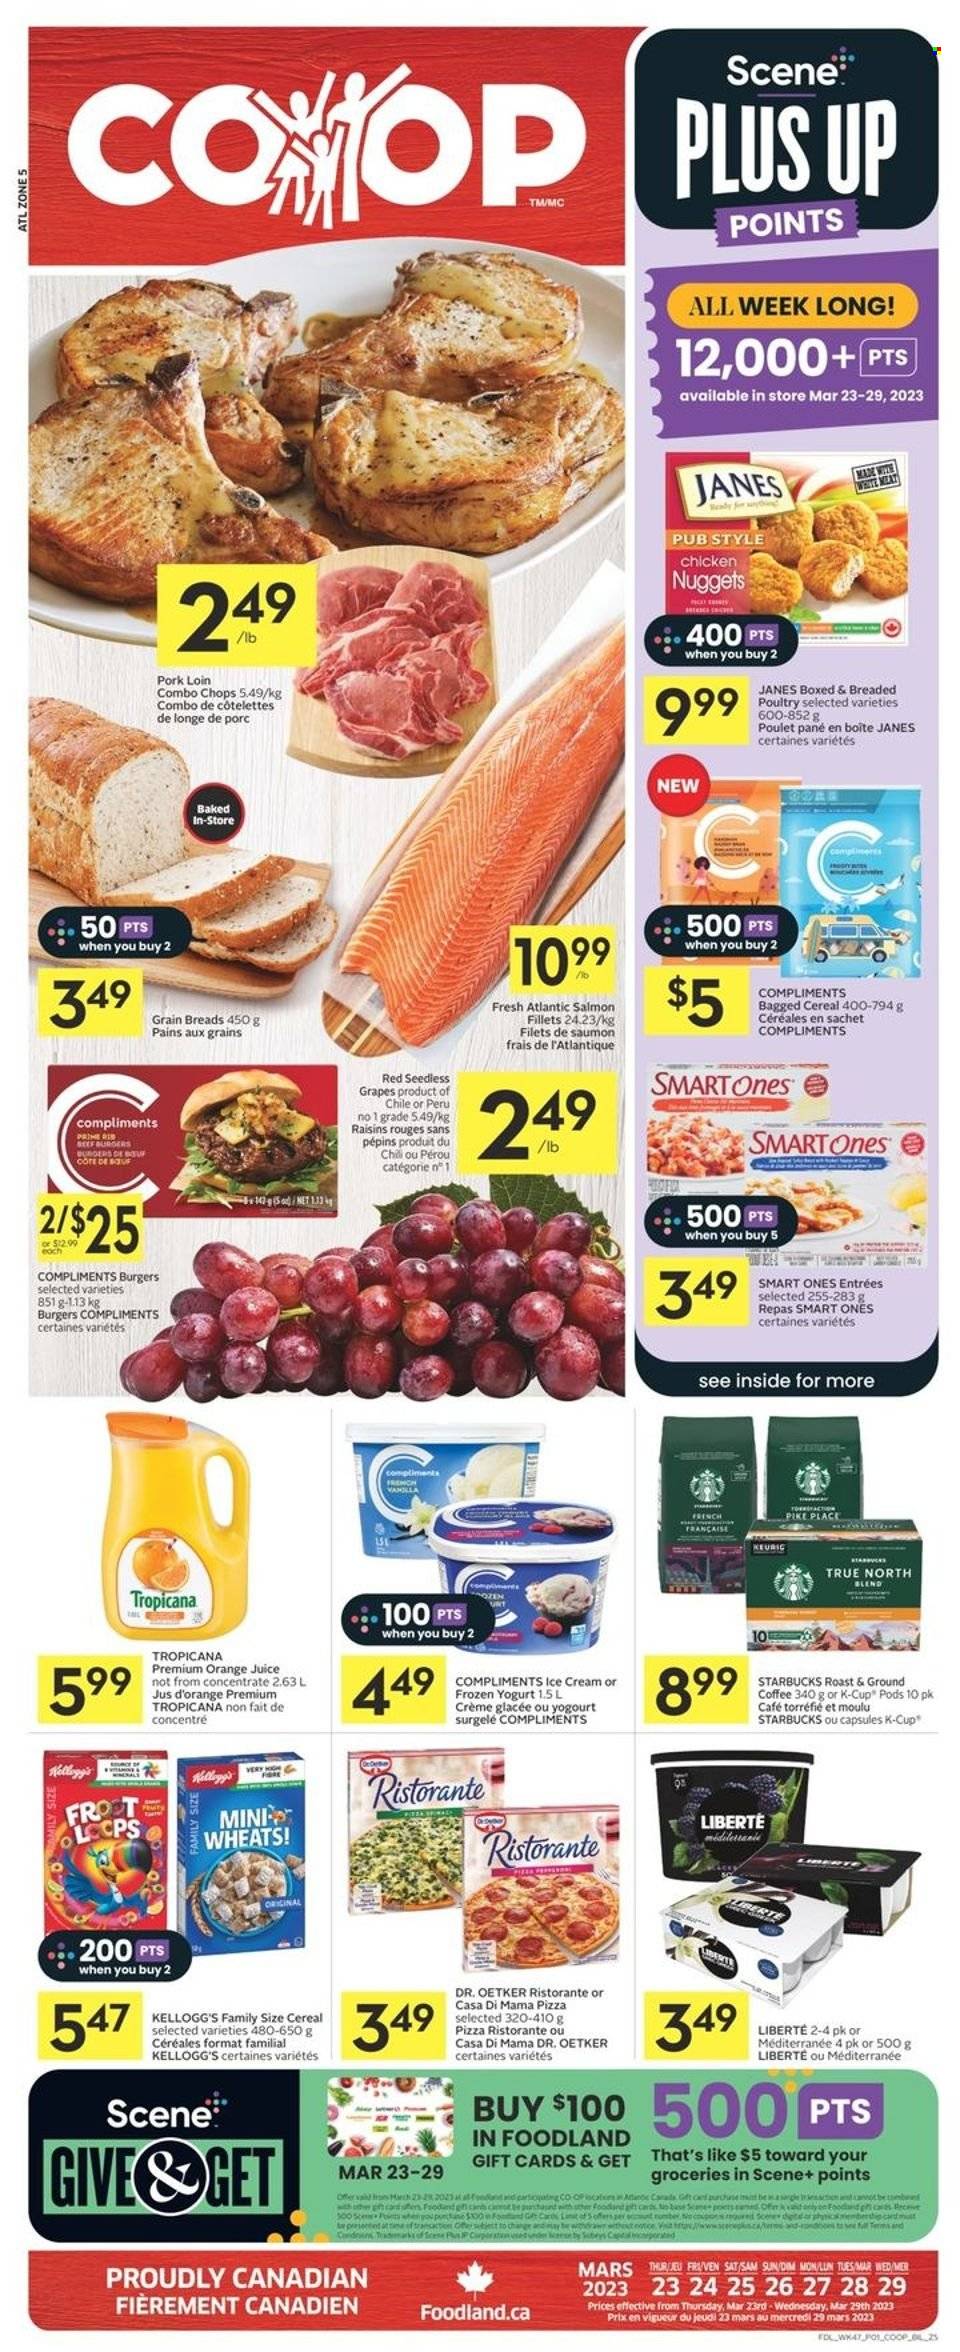 thumbnail - Co-op Flyer - March 23, 2023 - March 29, 2023 - Sales products - grapes, seedless grapes, salmon, salmon fillet, pizza, nuggets, hamburger, chicken nuggets, beef burger, roast, Dr. Oetker, yoghurt, ice cream, Mars, Kellogg's, cereals, dried fruit, orange juice, juice, coffee, ground coffee, coffee capsules, Starbucks, K-Cups, chicken, pork loin, pork meat, comb, raisins. Page 1.